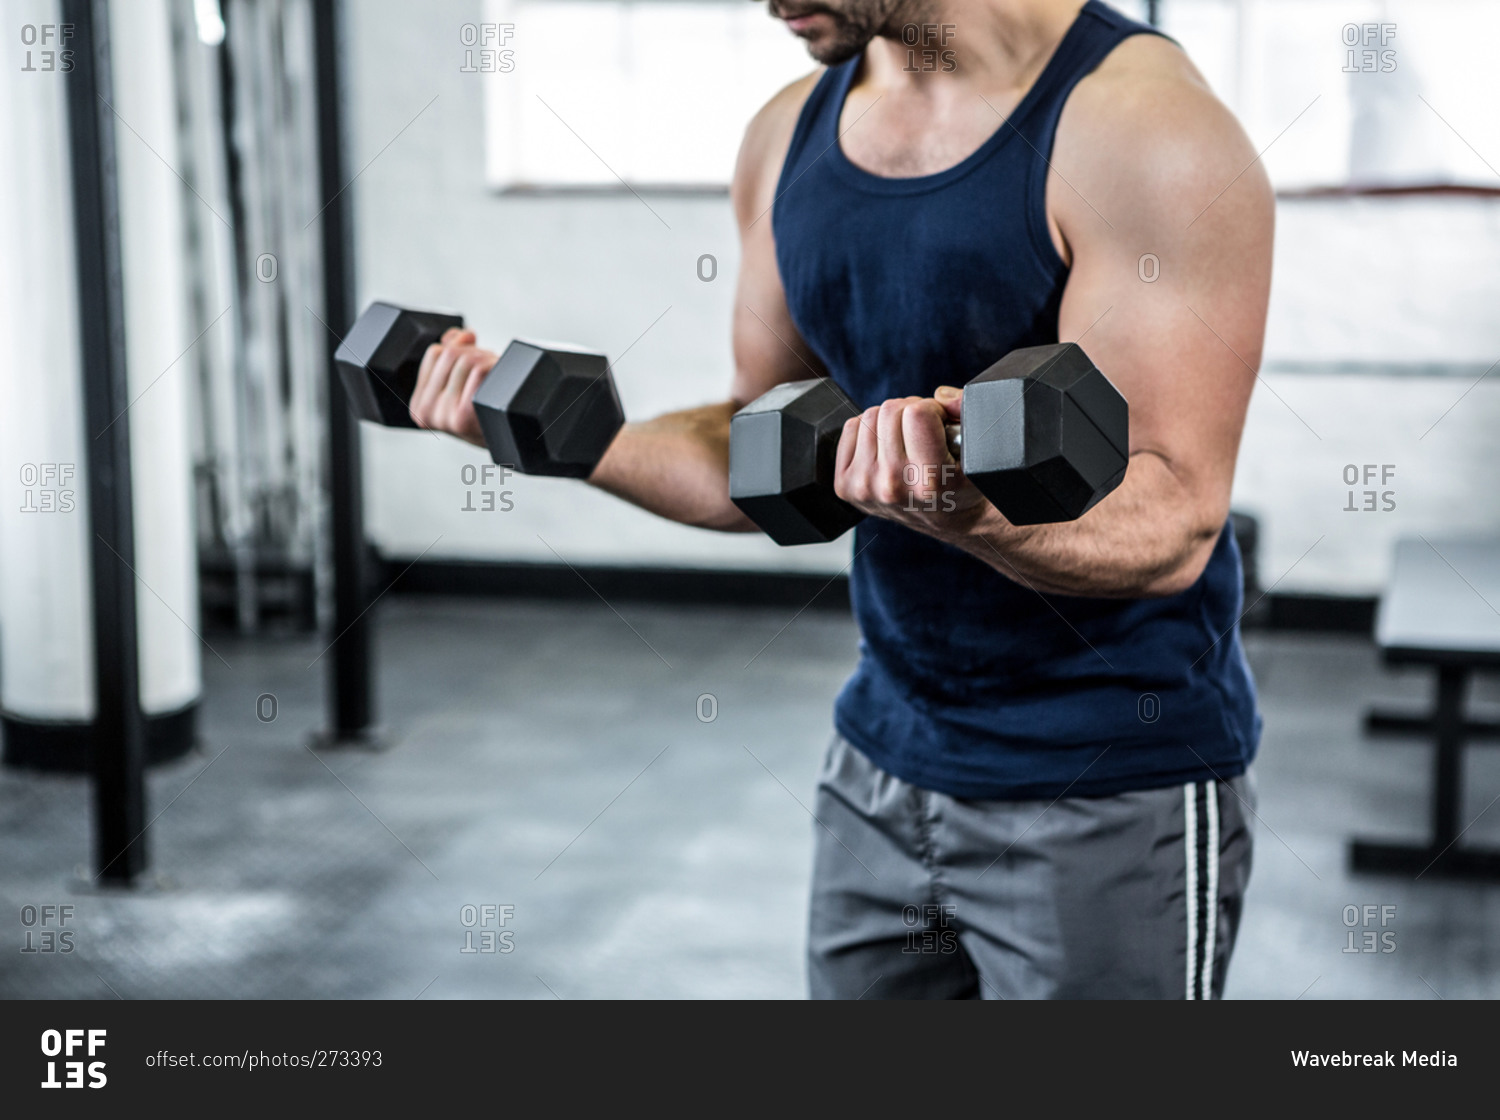 Heavy dumbbells being lifted by a fit man in a gym